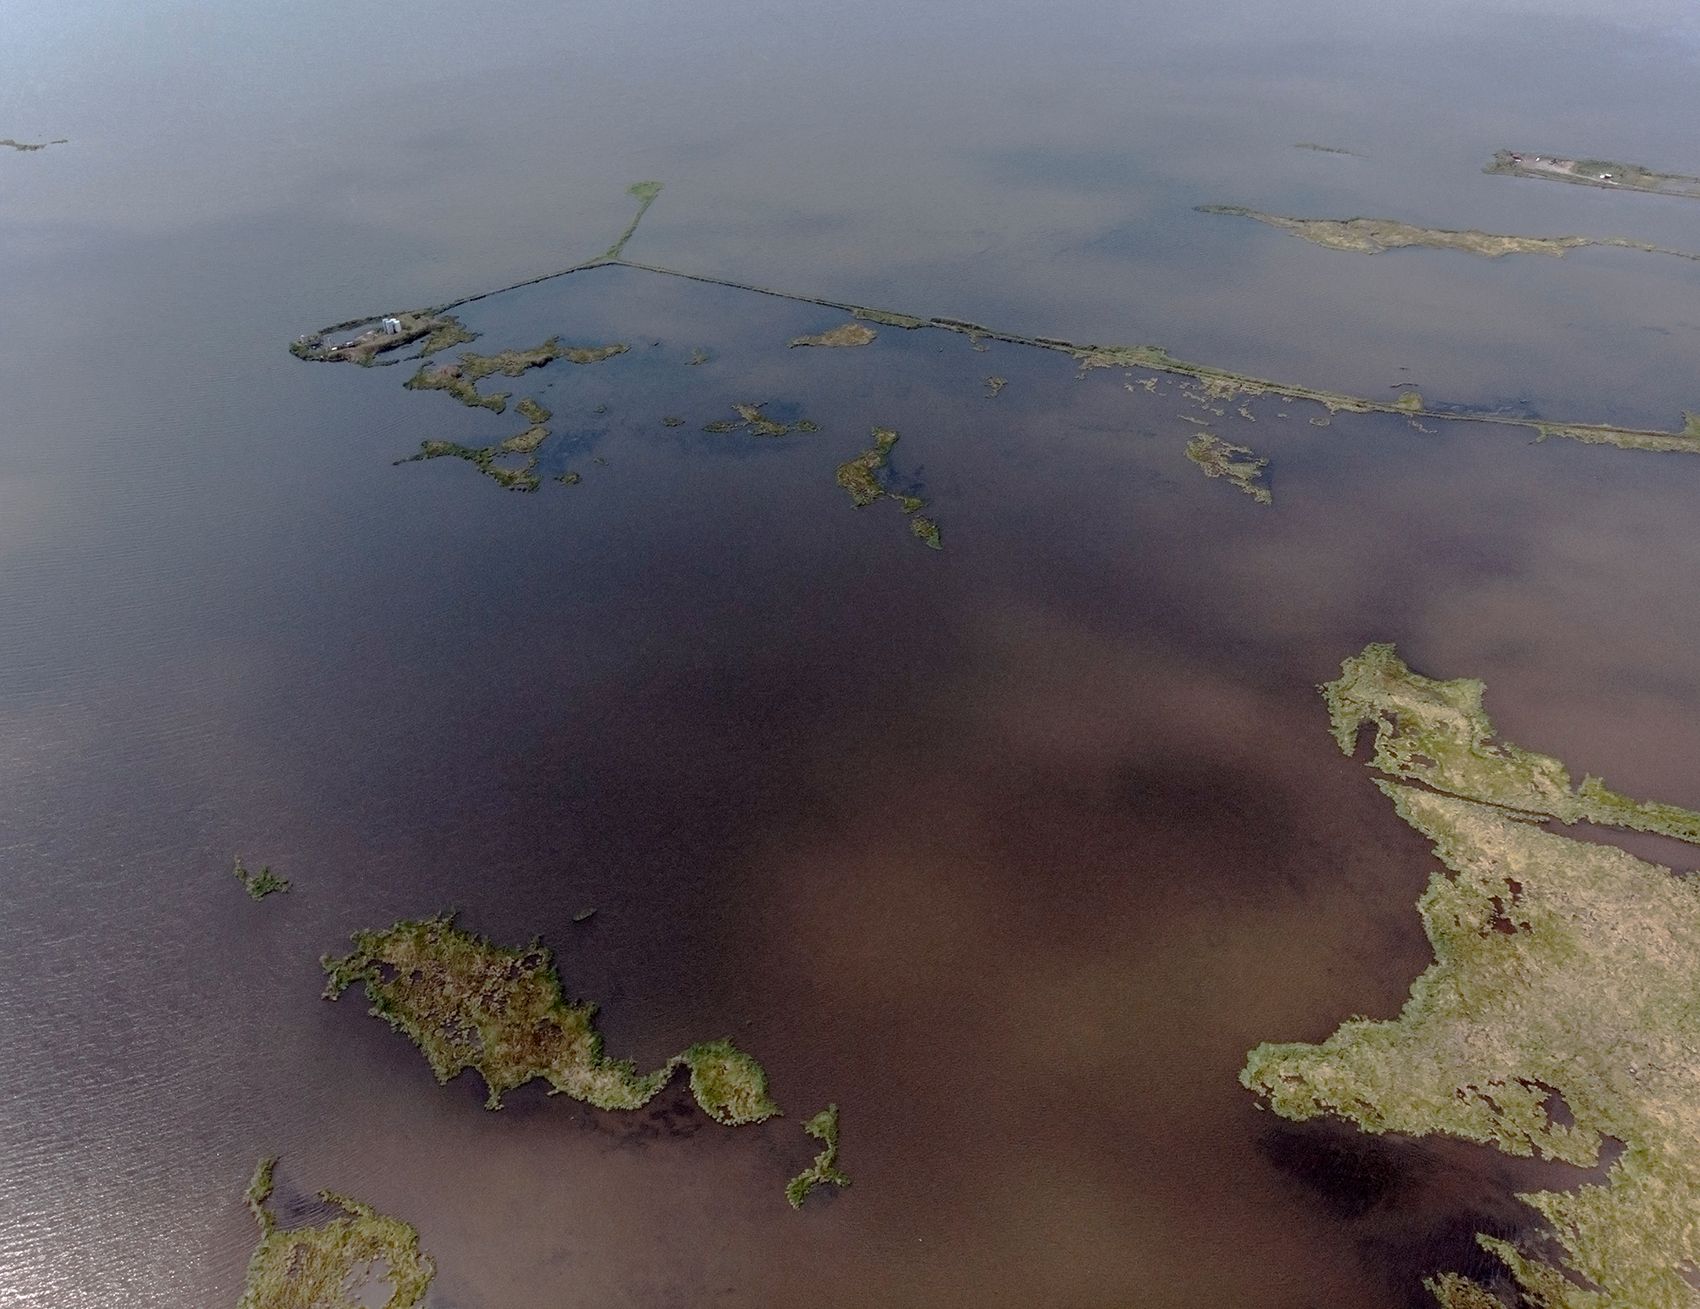 Algae, fueled by fertilizer runoff from farms into the Mississippi, grows off the coast of Louisiana and Texas, sucking up oxygen, threatening the extinction of many species of sea life. Image by Spike Johnson. United States, 2019. 